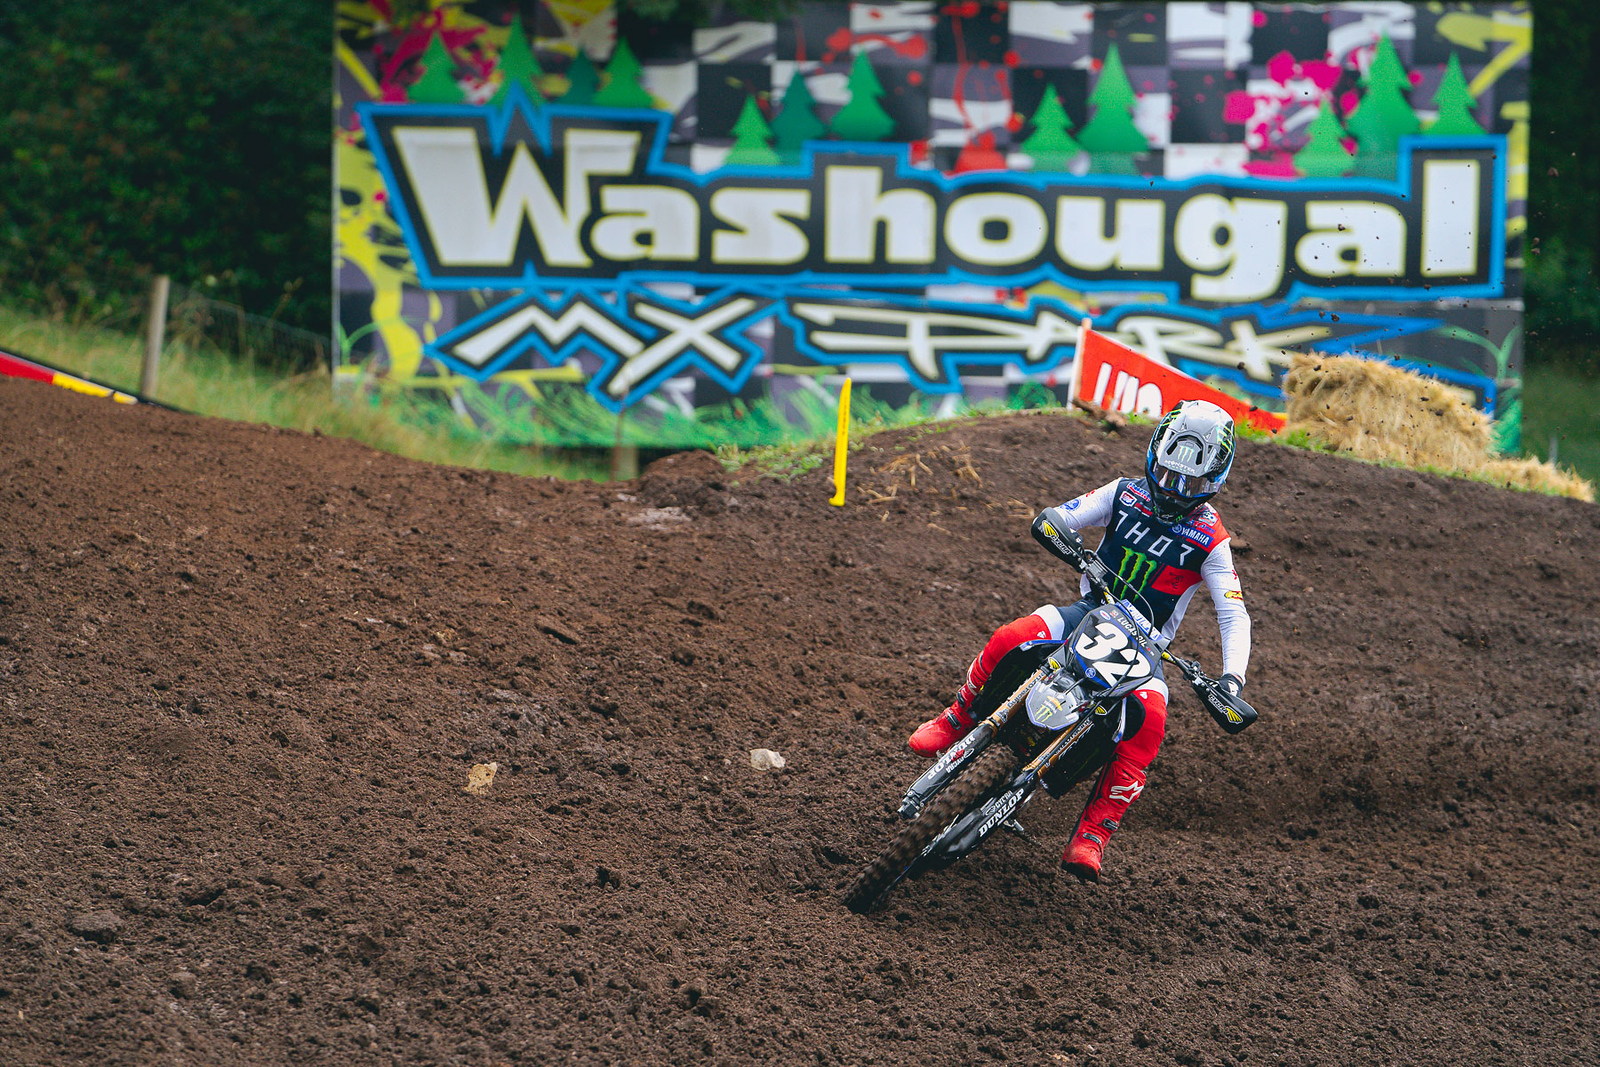 2022 Washougal Motocross Qualifying Report & Results Swapmoto Live